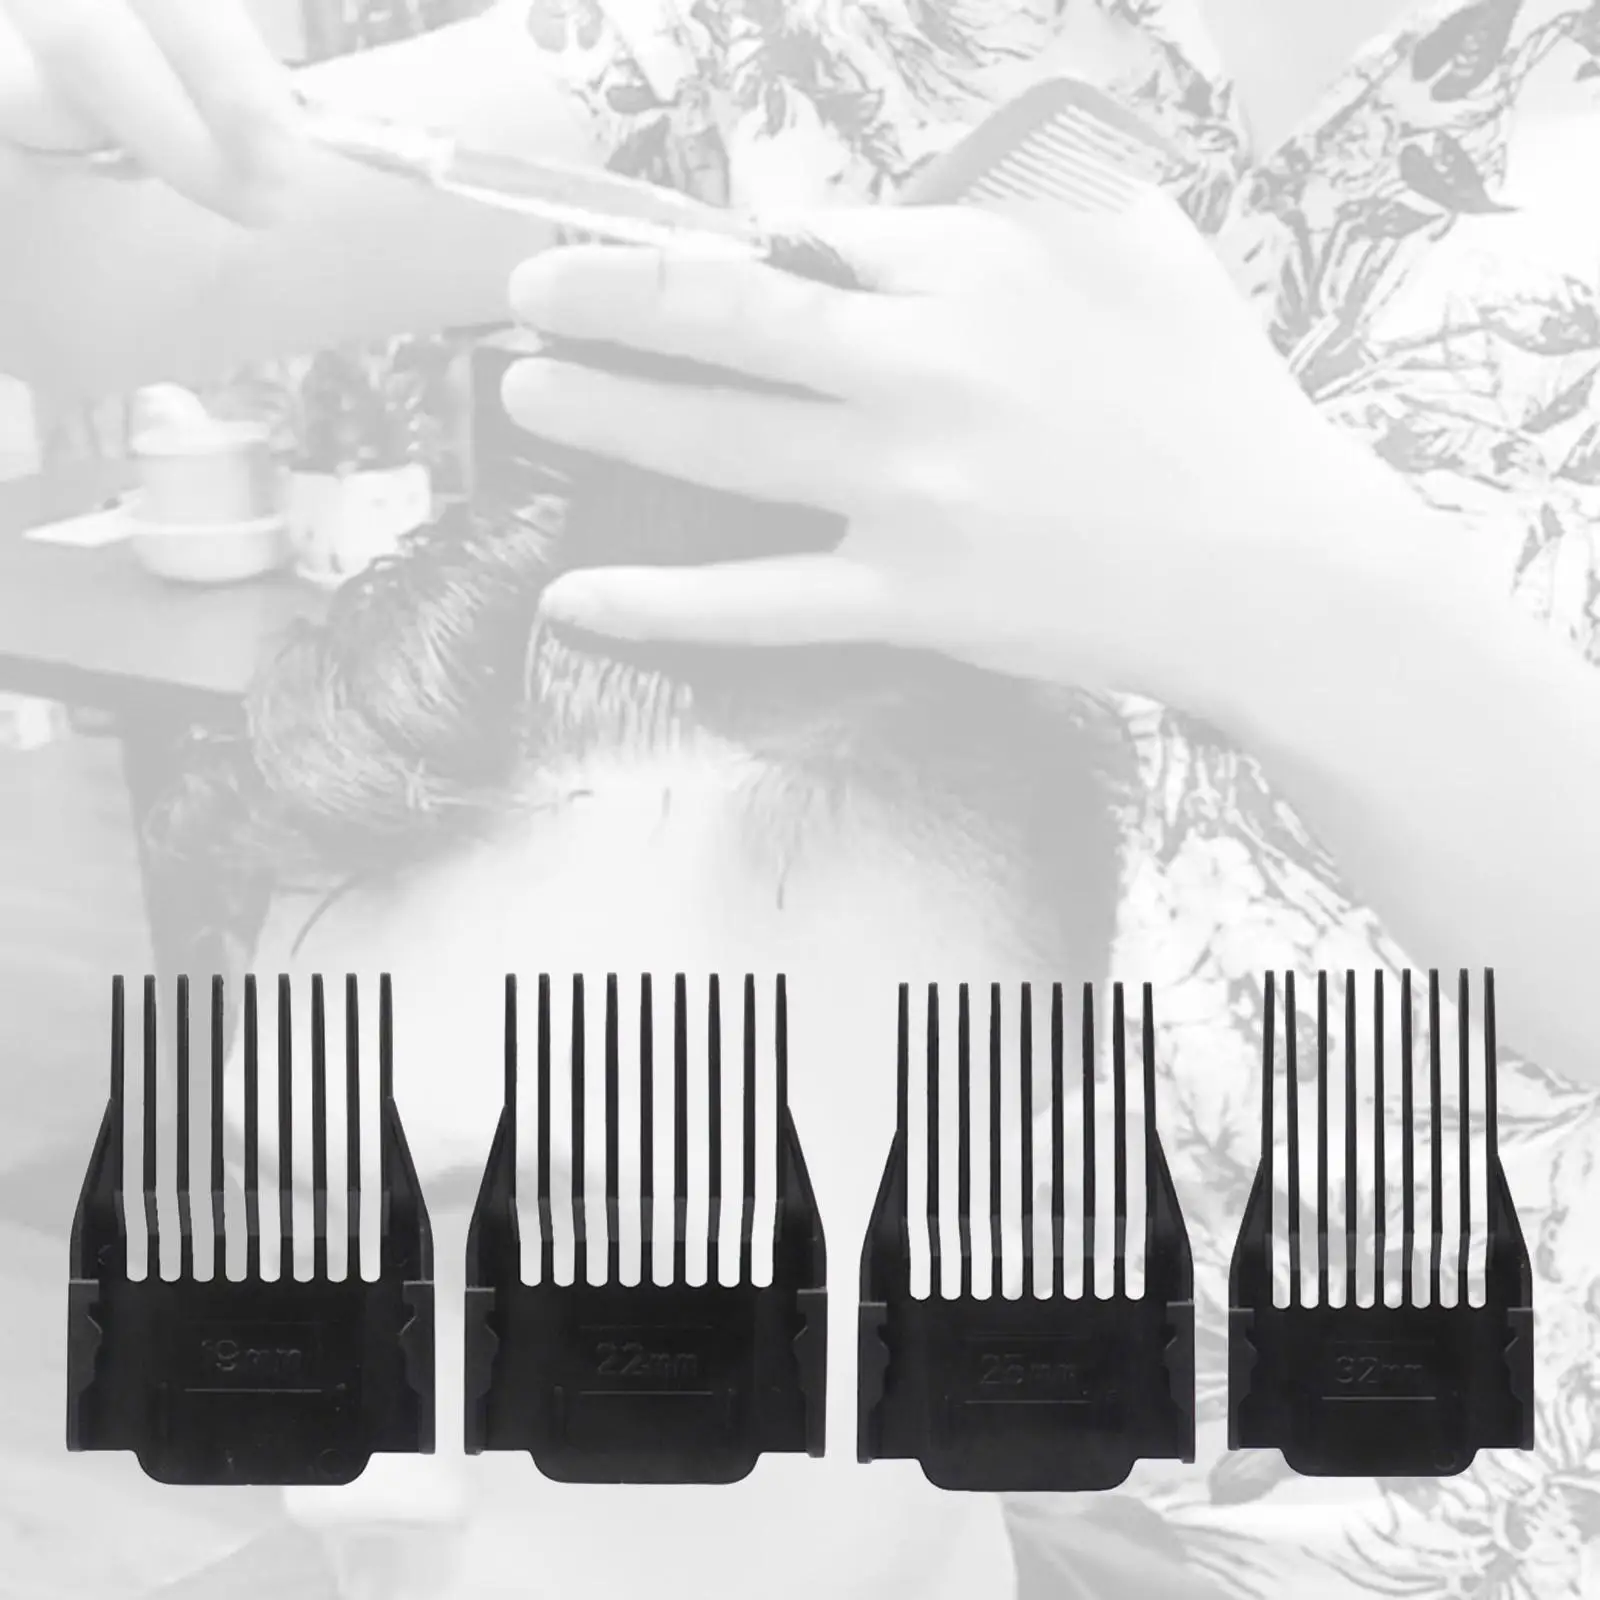 4 Pieces Hair Trimmer Clipper Guards Guide Combs Hair Clipper Limit Comb for Stylists and Barbers